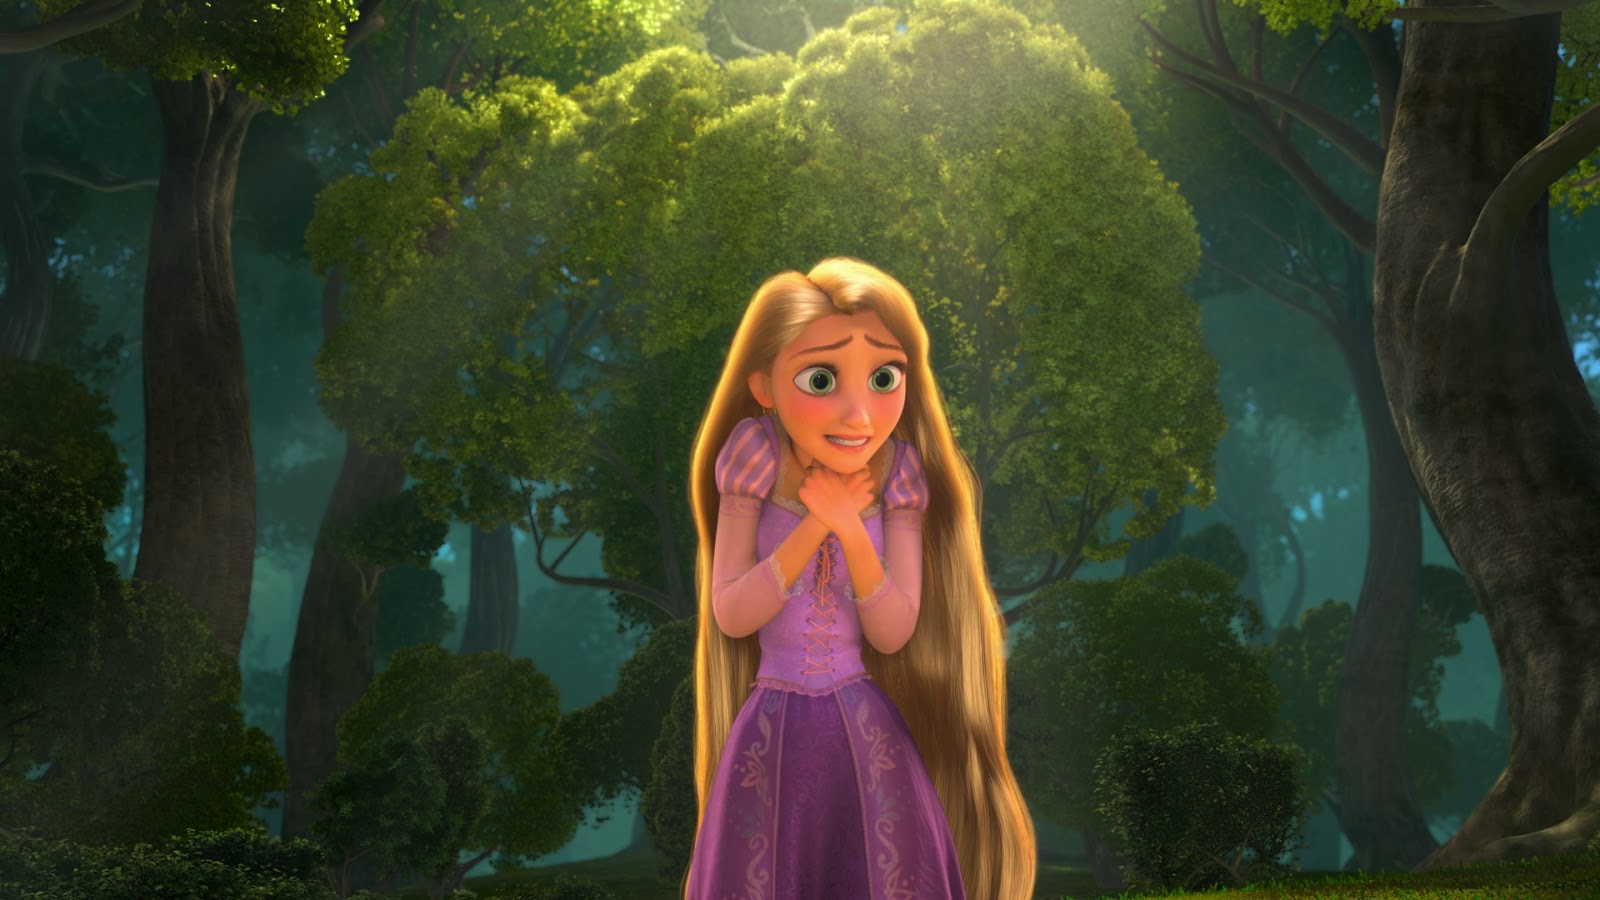 Tangled rapunzel and hd walls find wallpapers | Chainimage